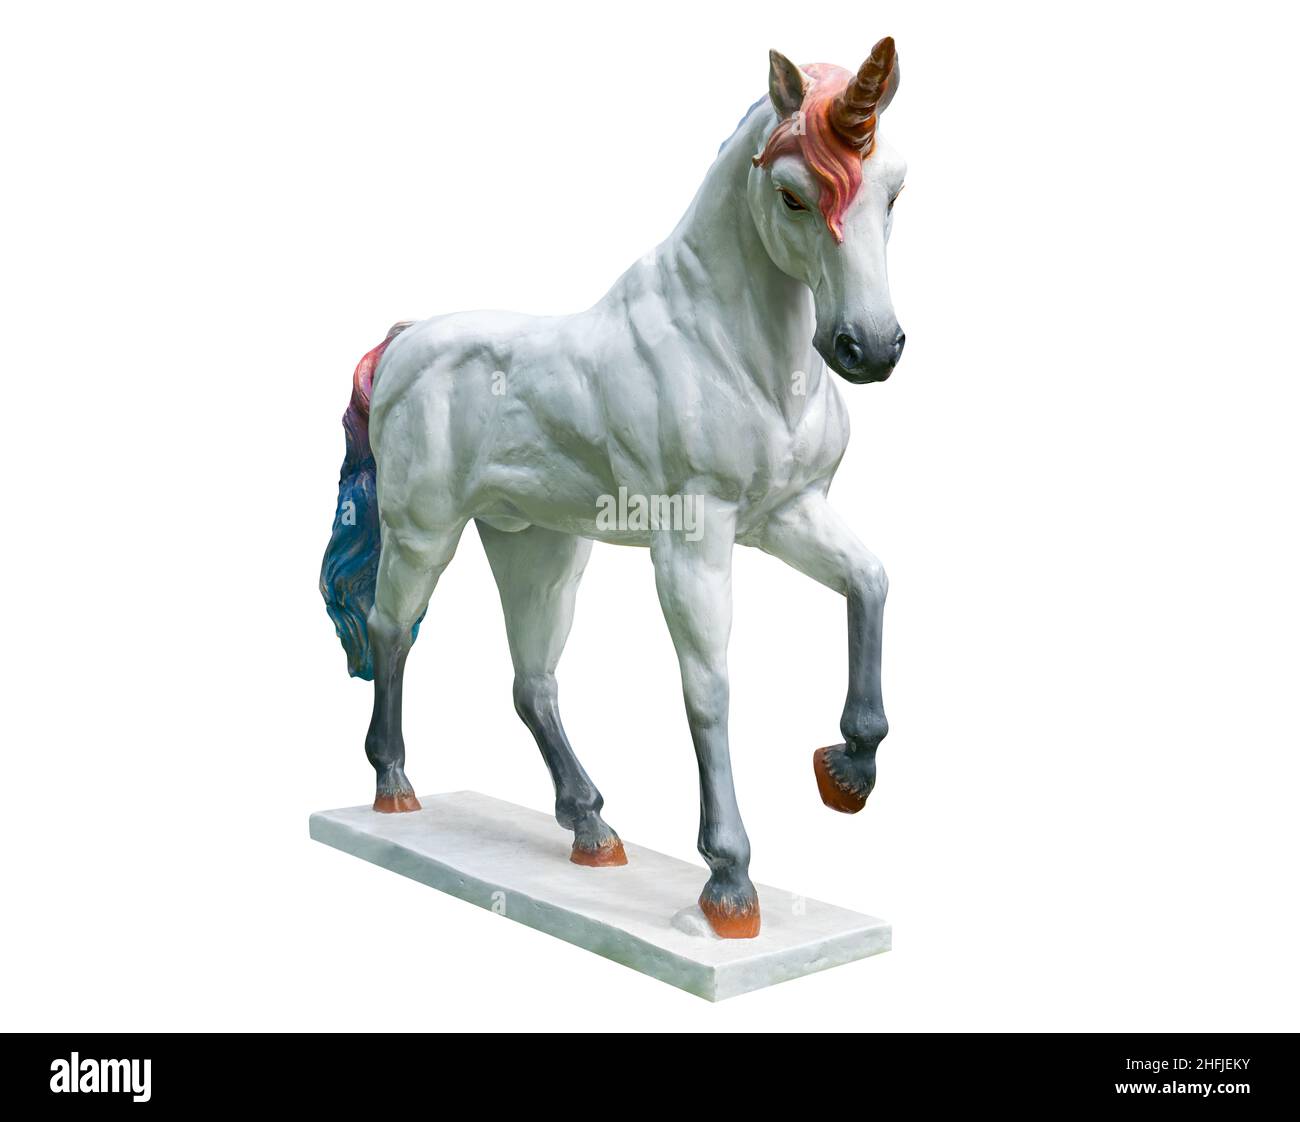 Isolated sculpture of white unicorn on white background, white unicorn with the rainbow color of horn, hair, and tail, unicorn for garden decoration. Stock Photo